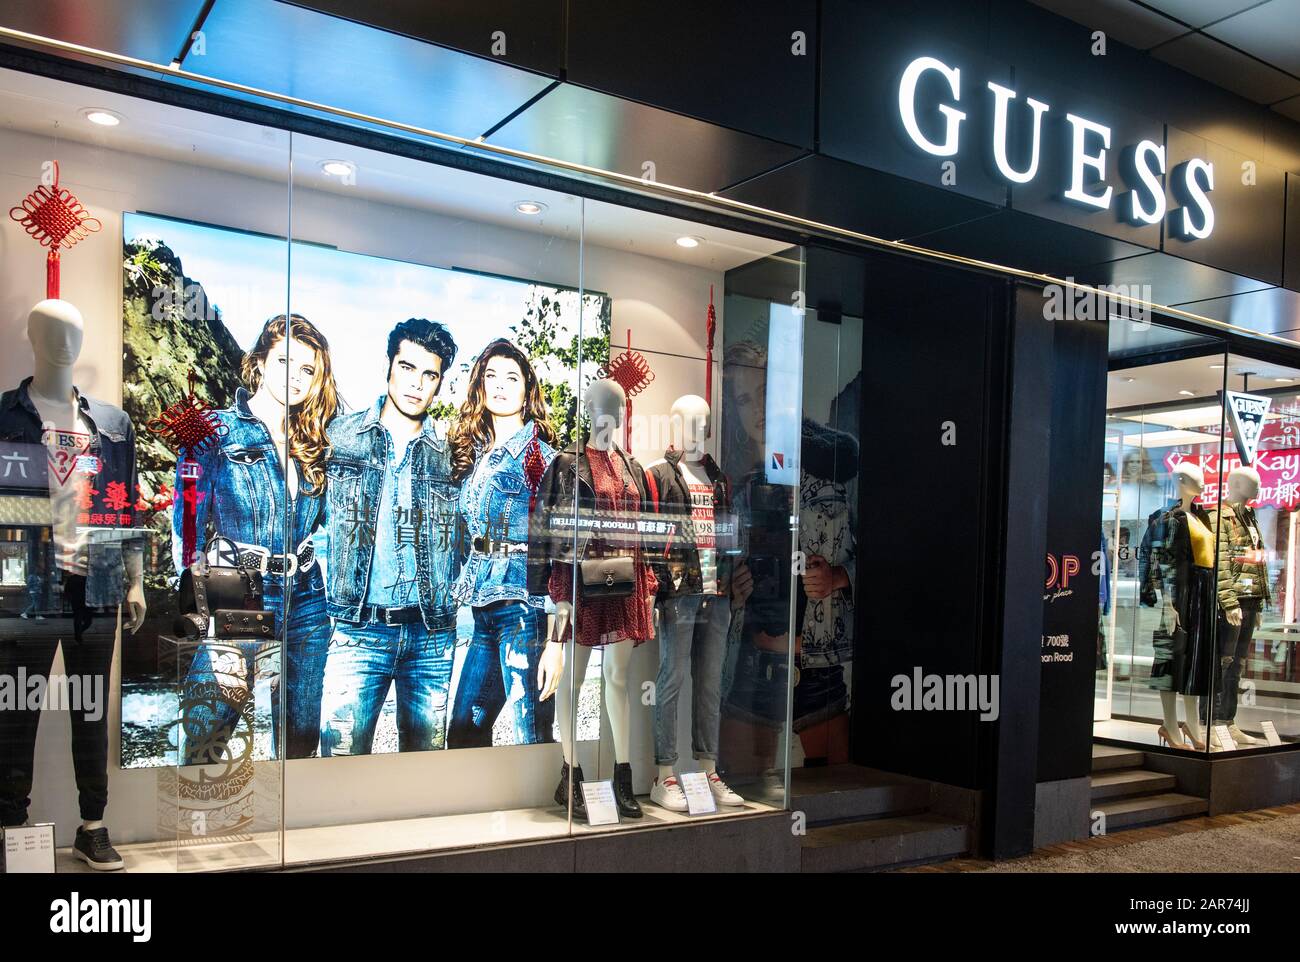 American clothing brand and retailer Guess store seen in Hong Kong Stock  Photo - Alamy